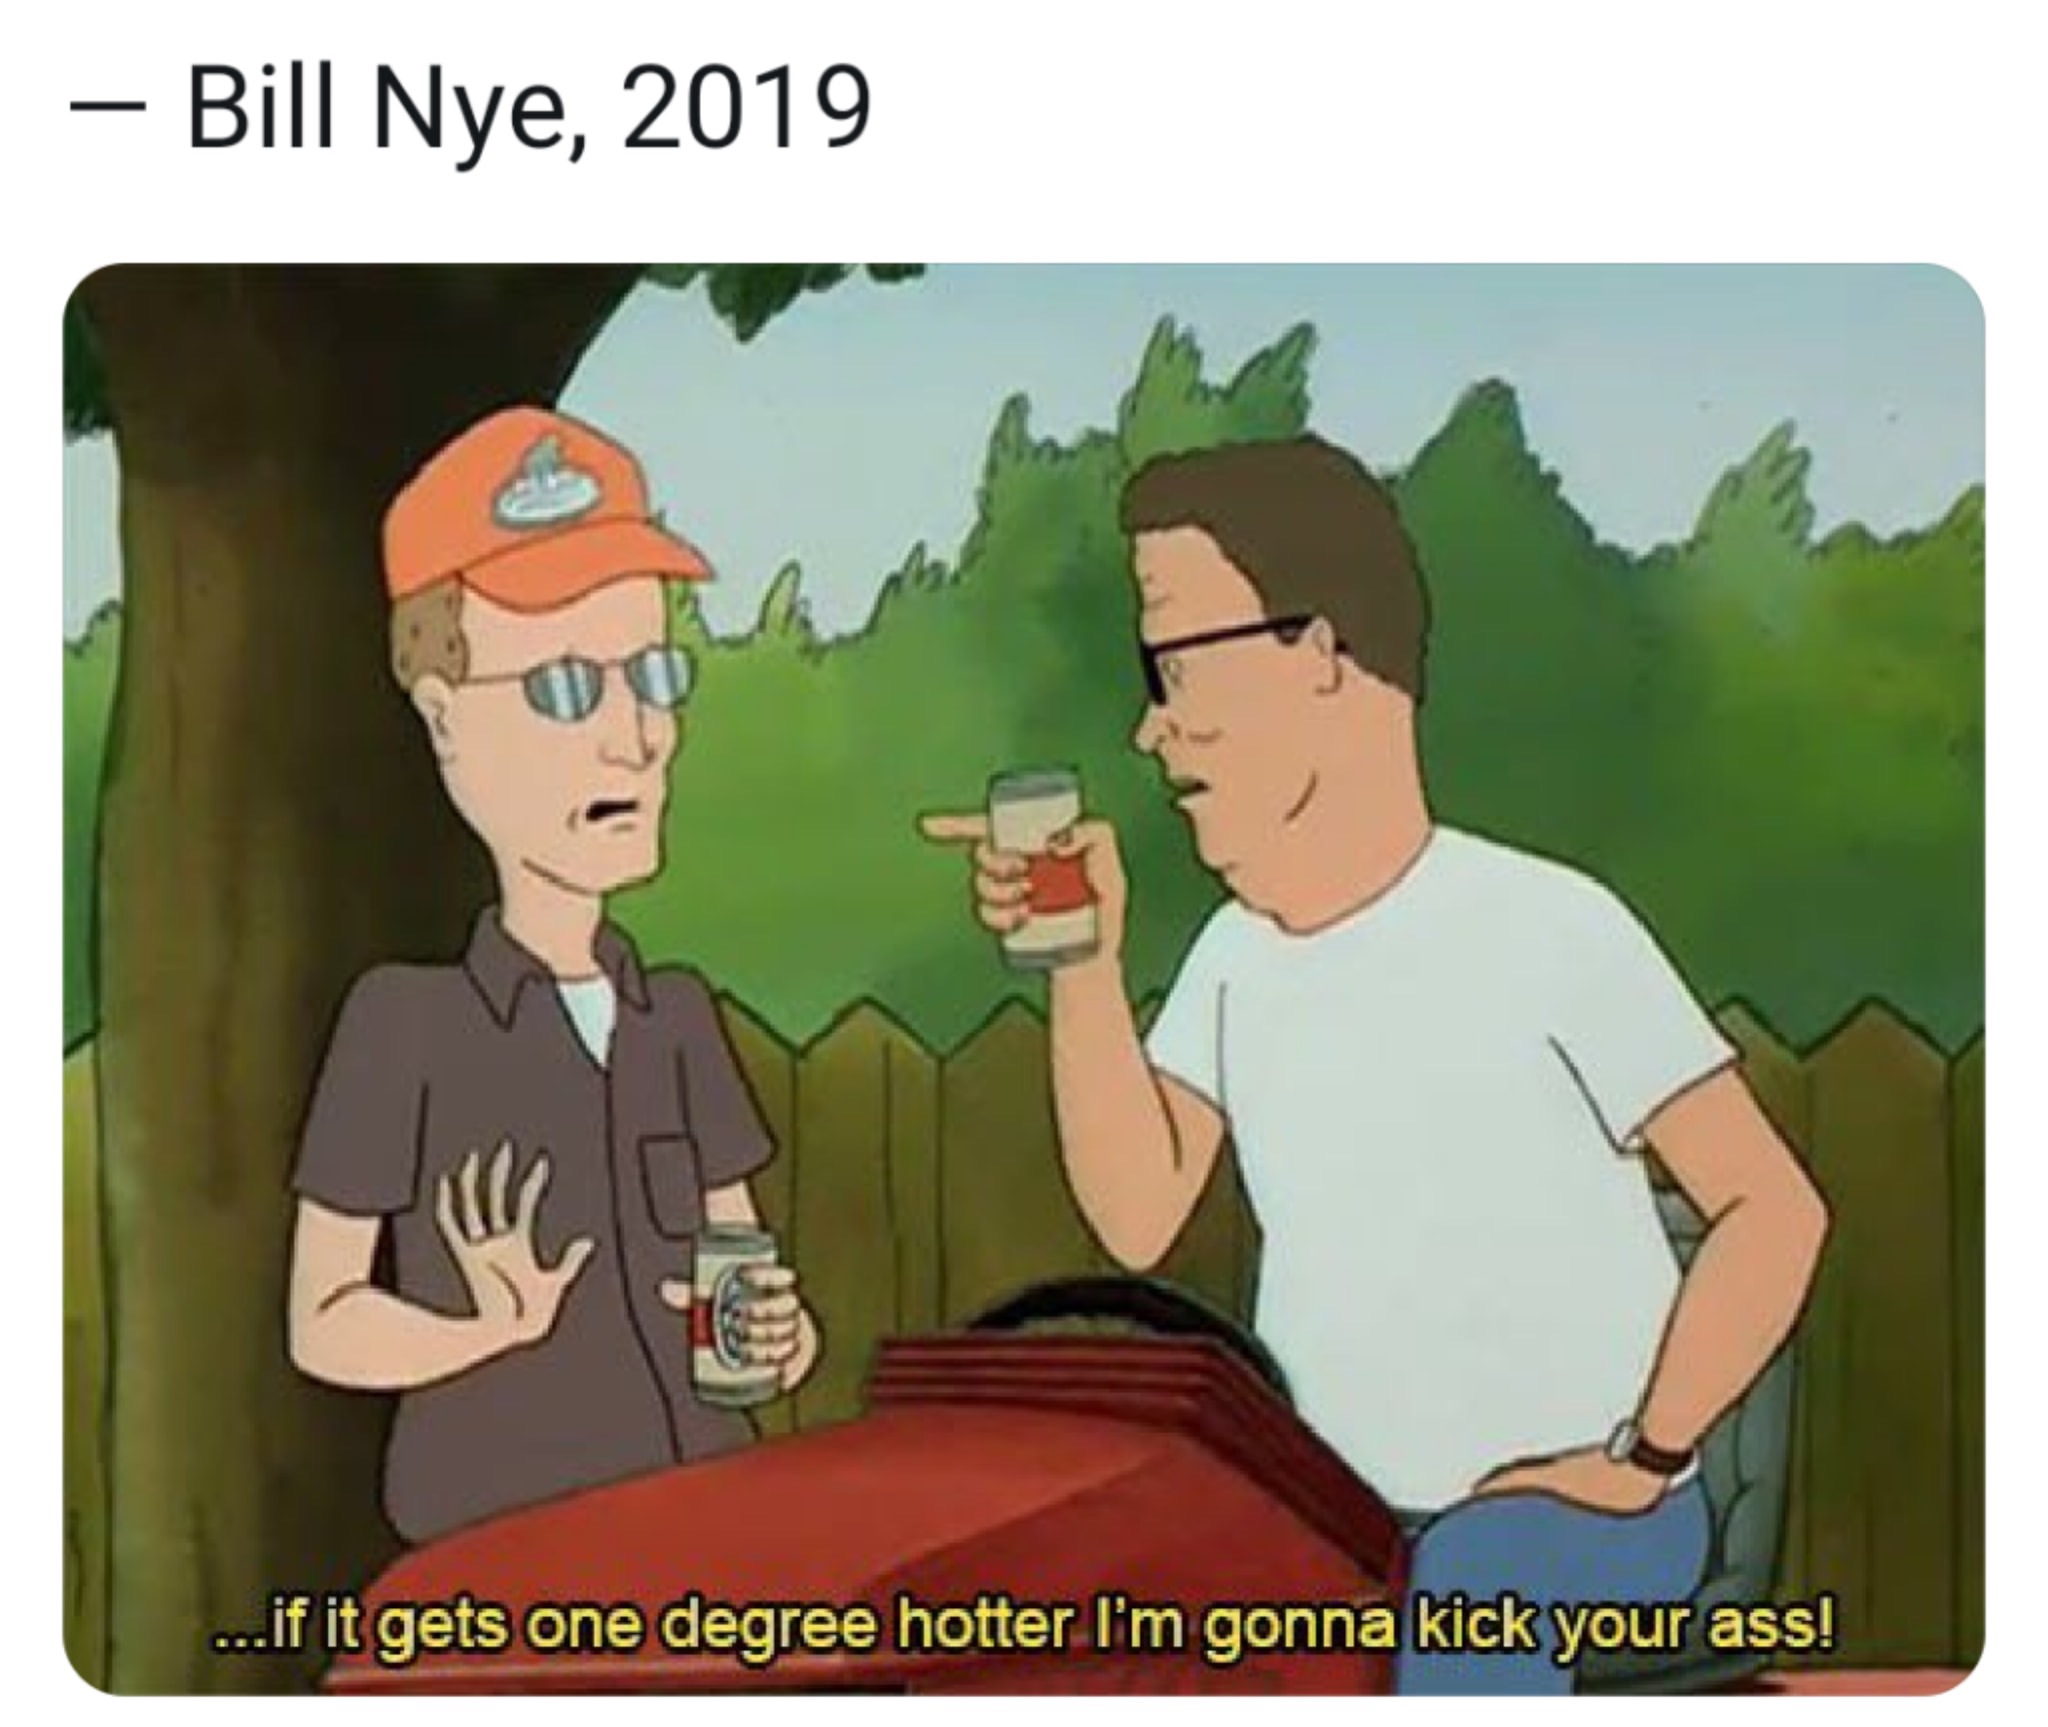 bill nye 2019 meme - Bill Nye, 2019 ...if it gets one degree hotter I'm gonna kick your ass!